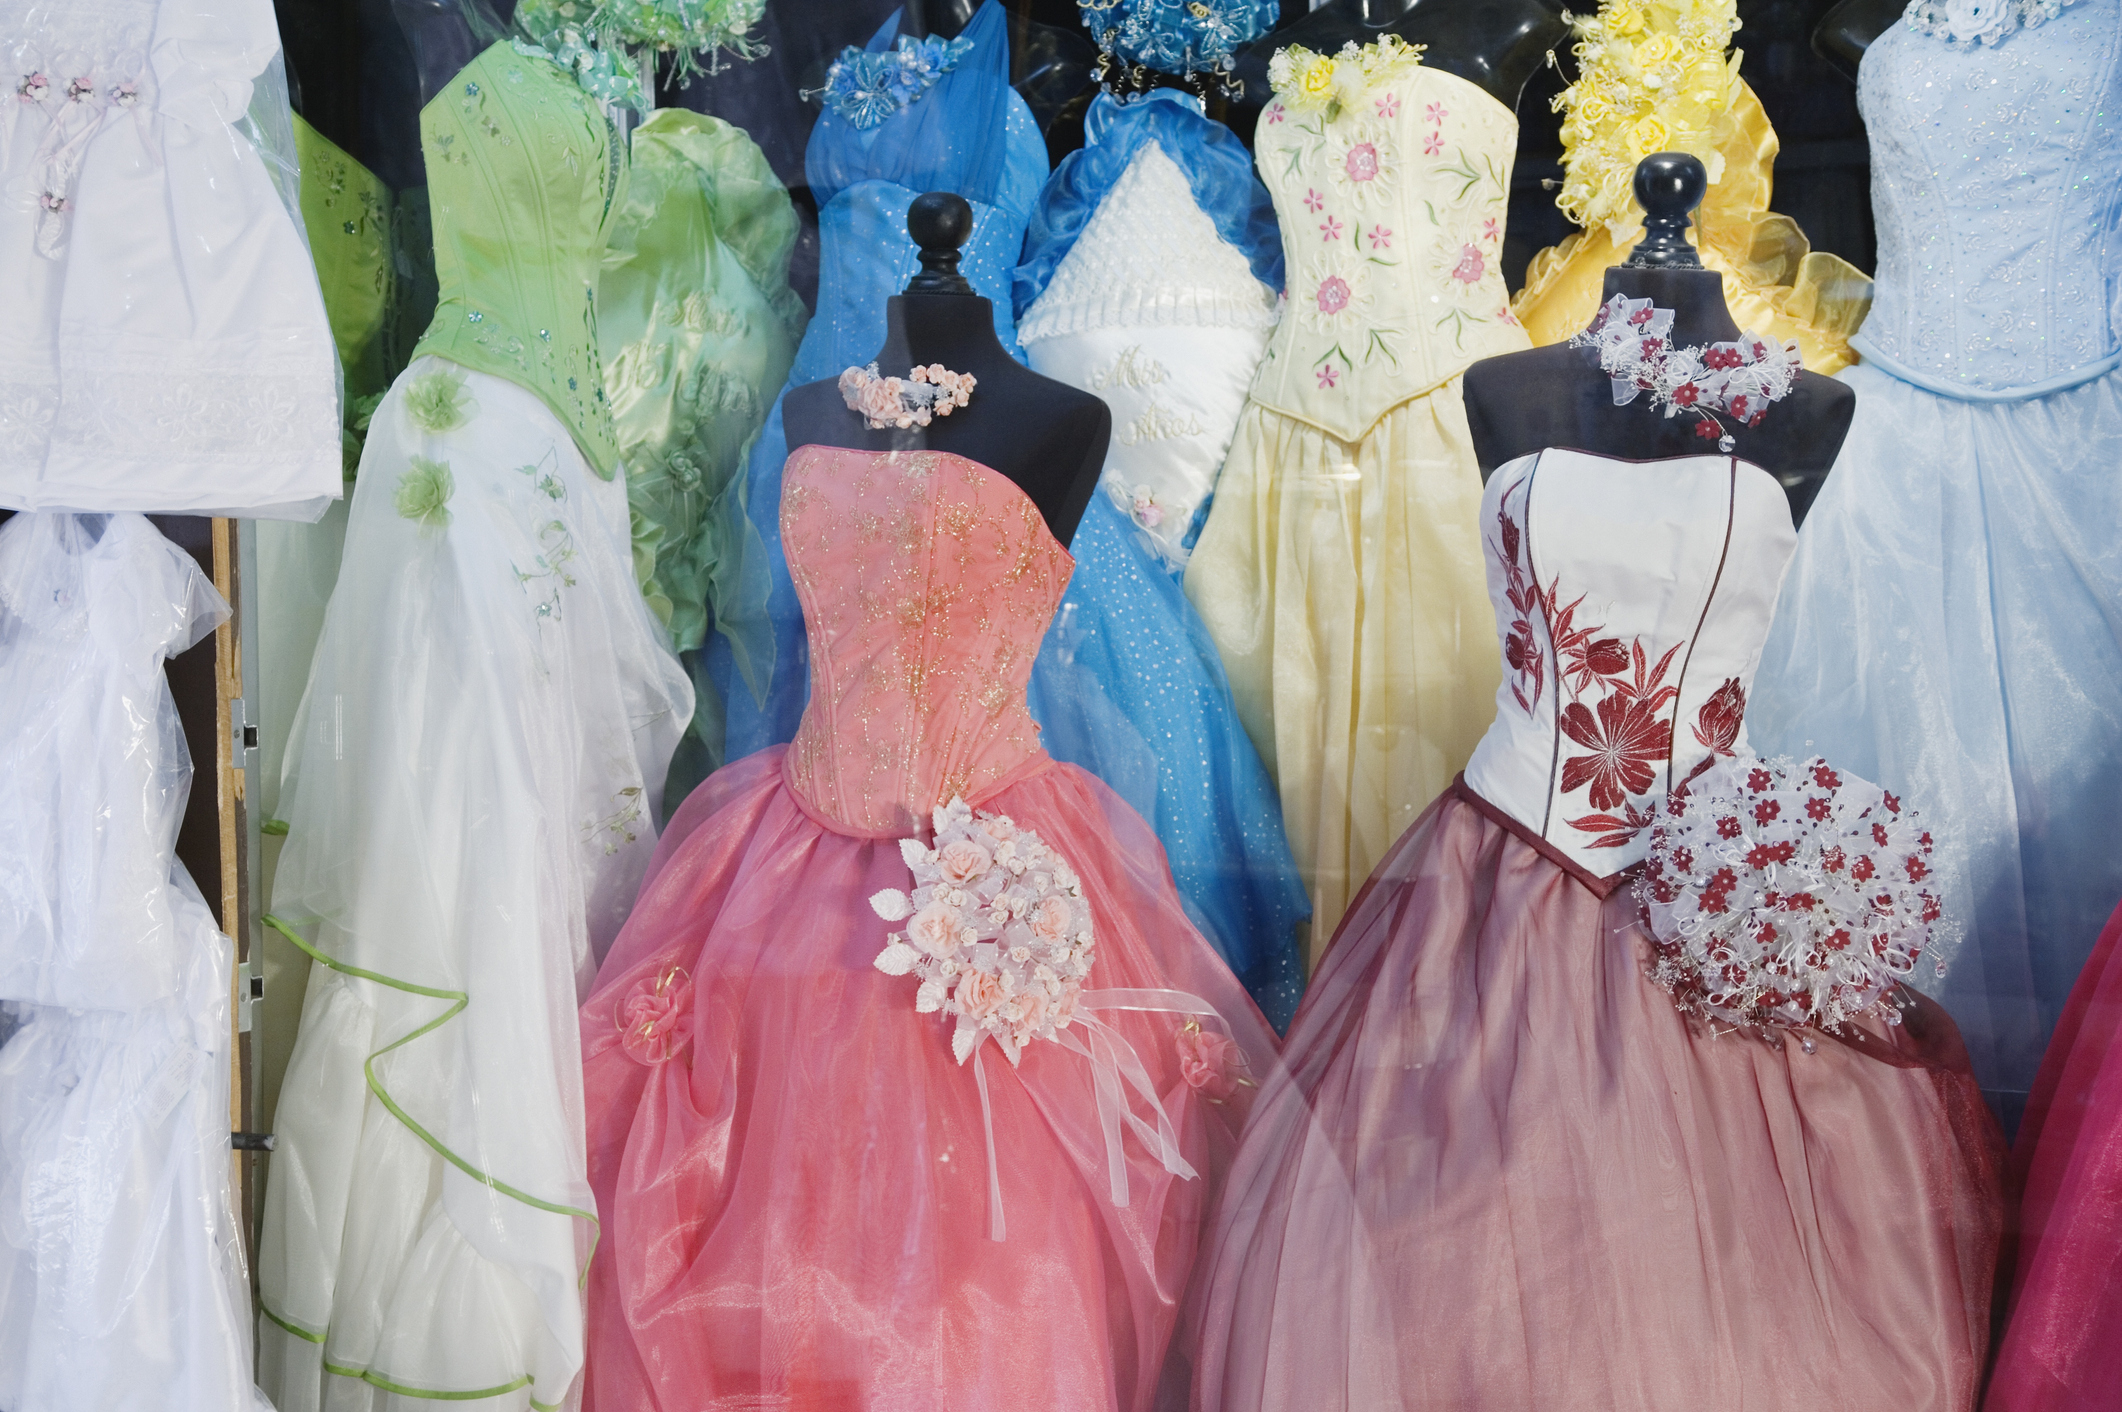 Quinceañera dress on display in a shop